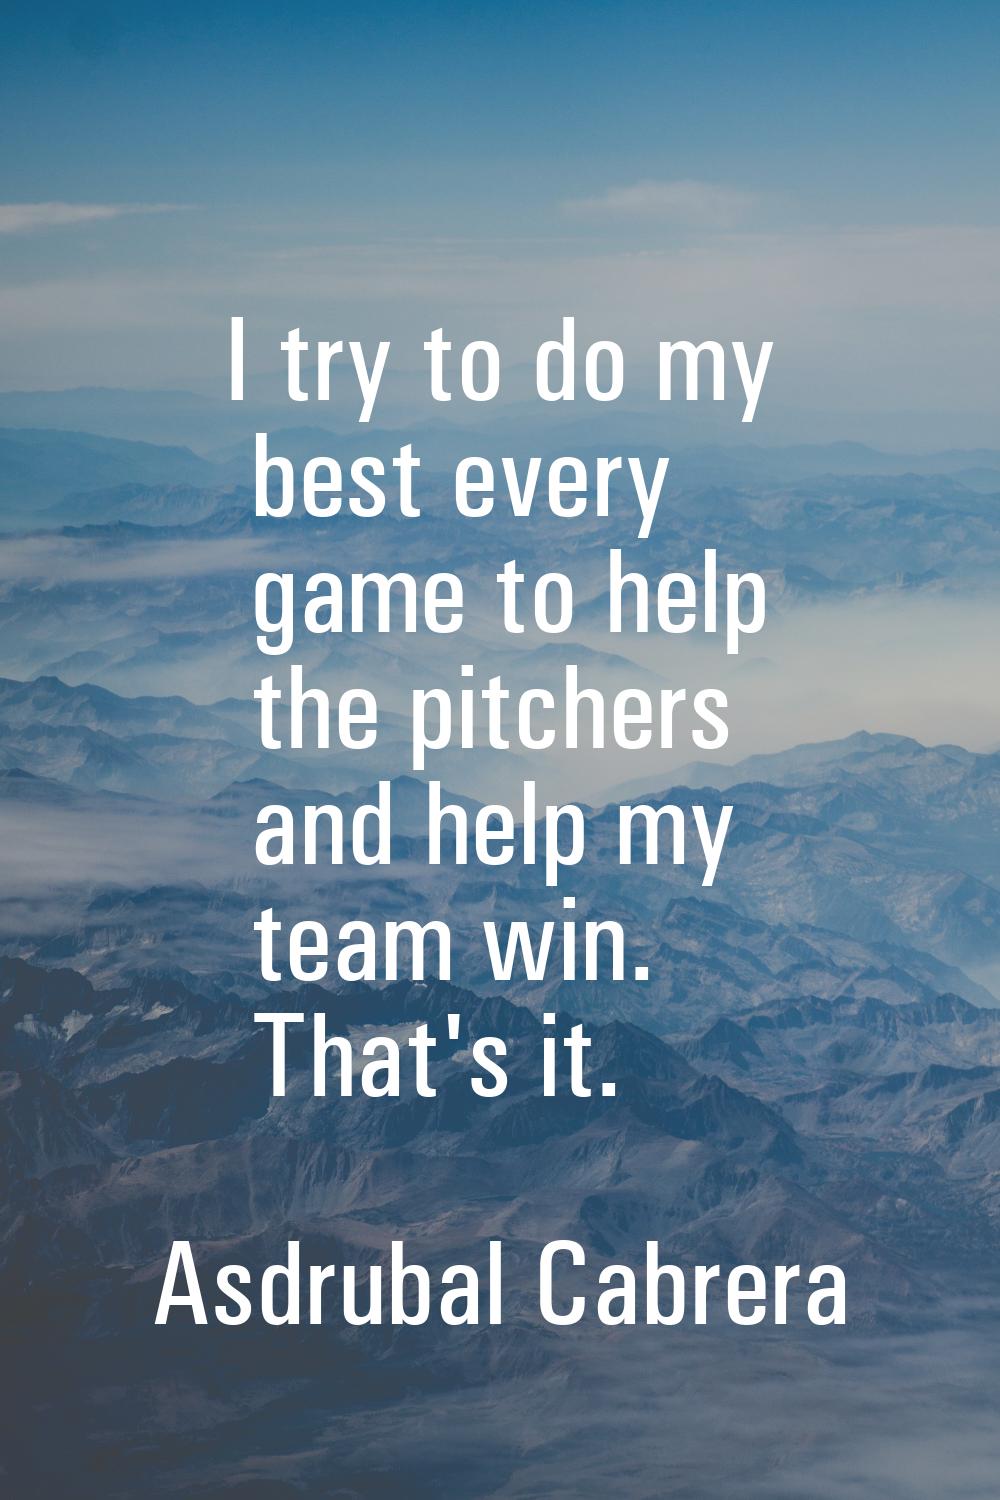 I try to do my best every game to help the pitchers and help my team win. That's it.